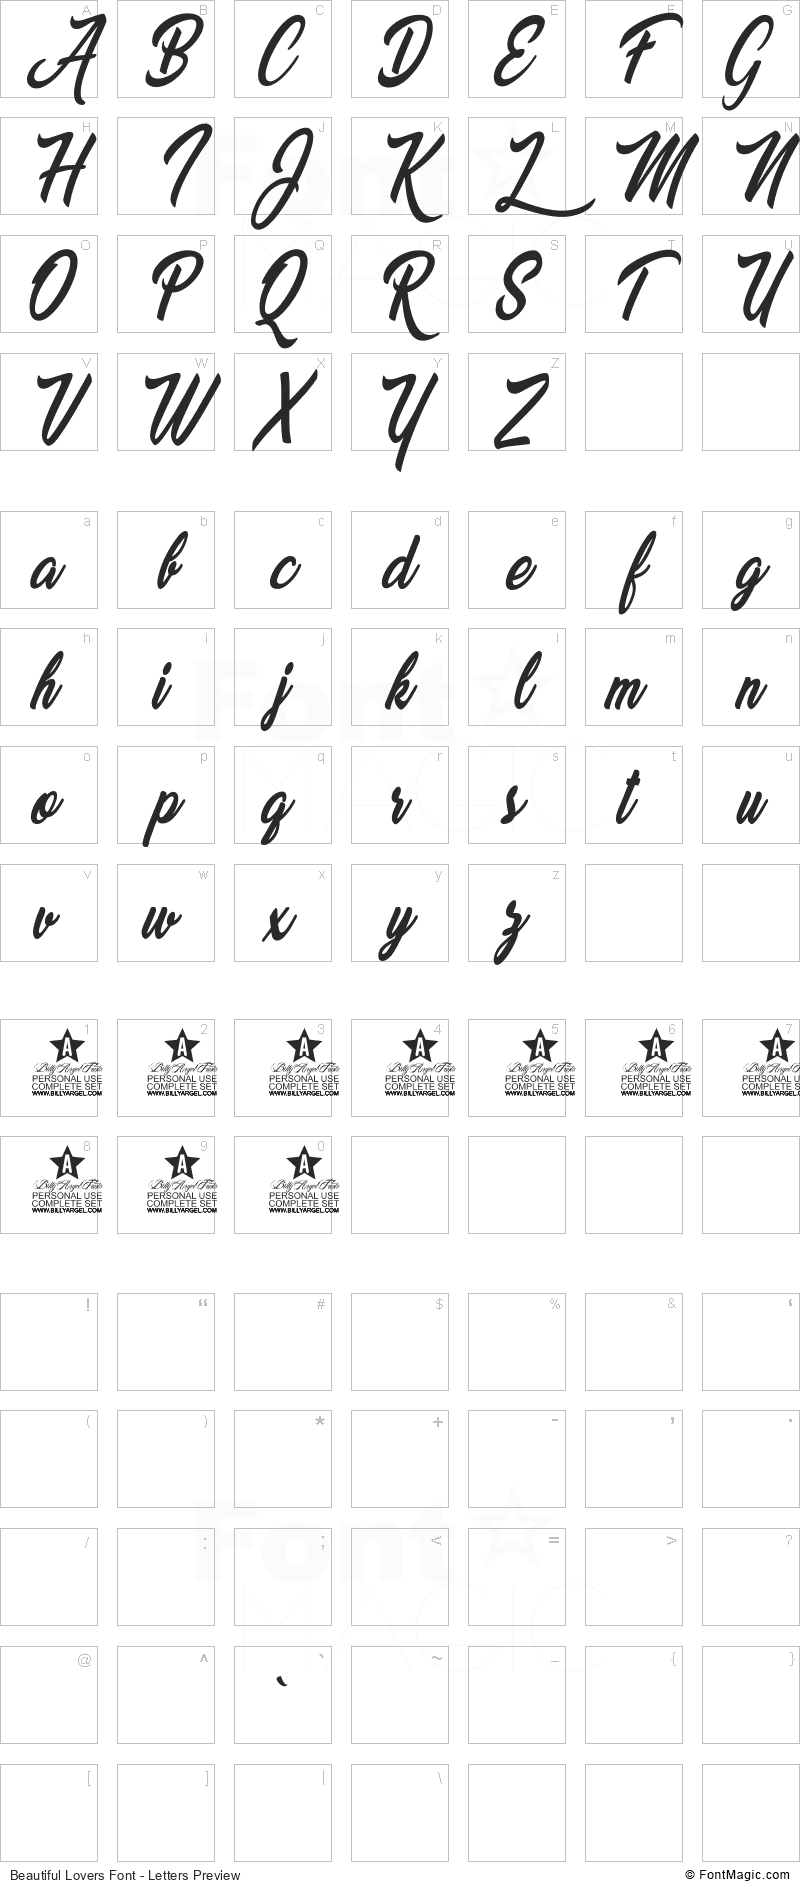 Beautiful Lovers Font - All Latters Preview Chart